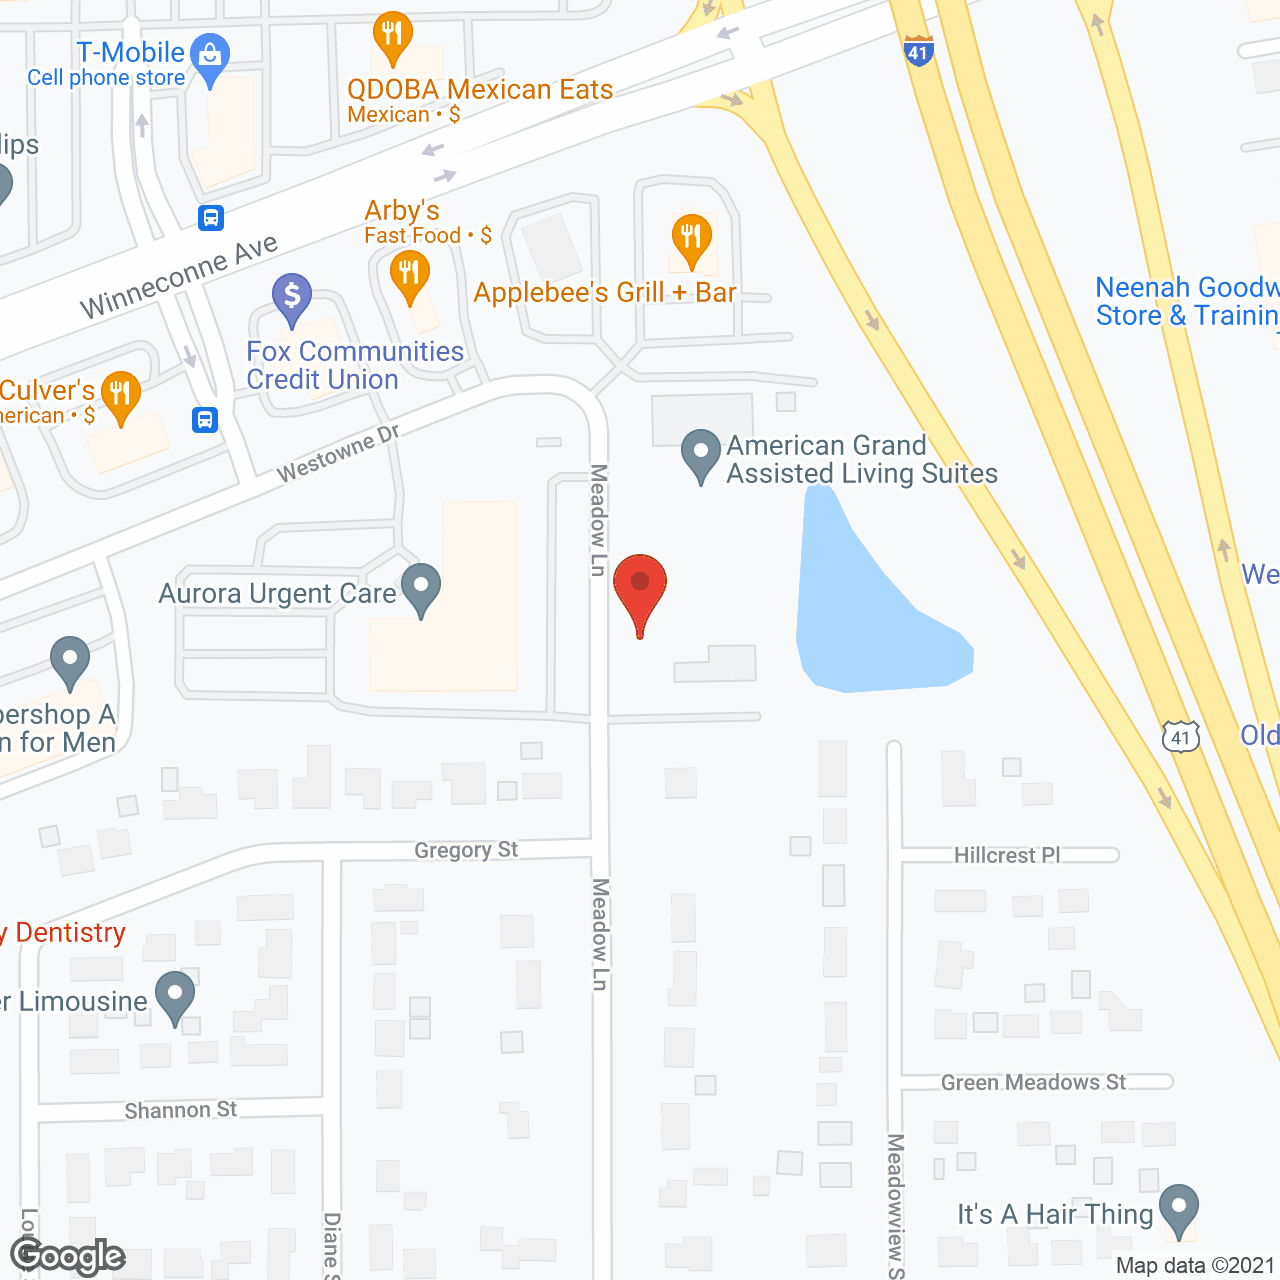 American Grand Assisted Living Suites in google map